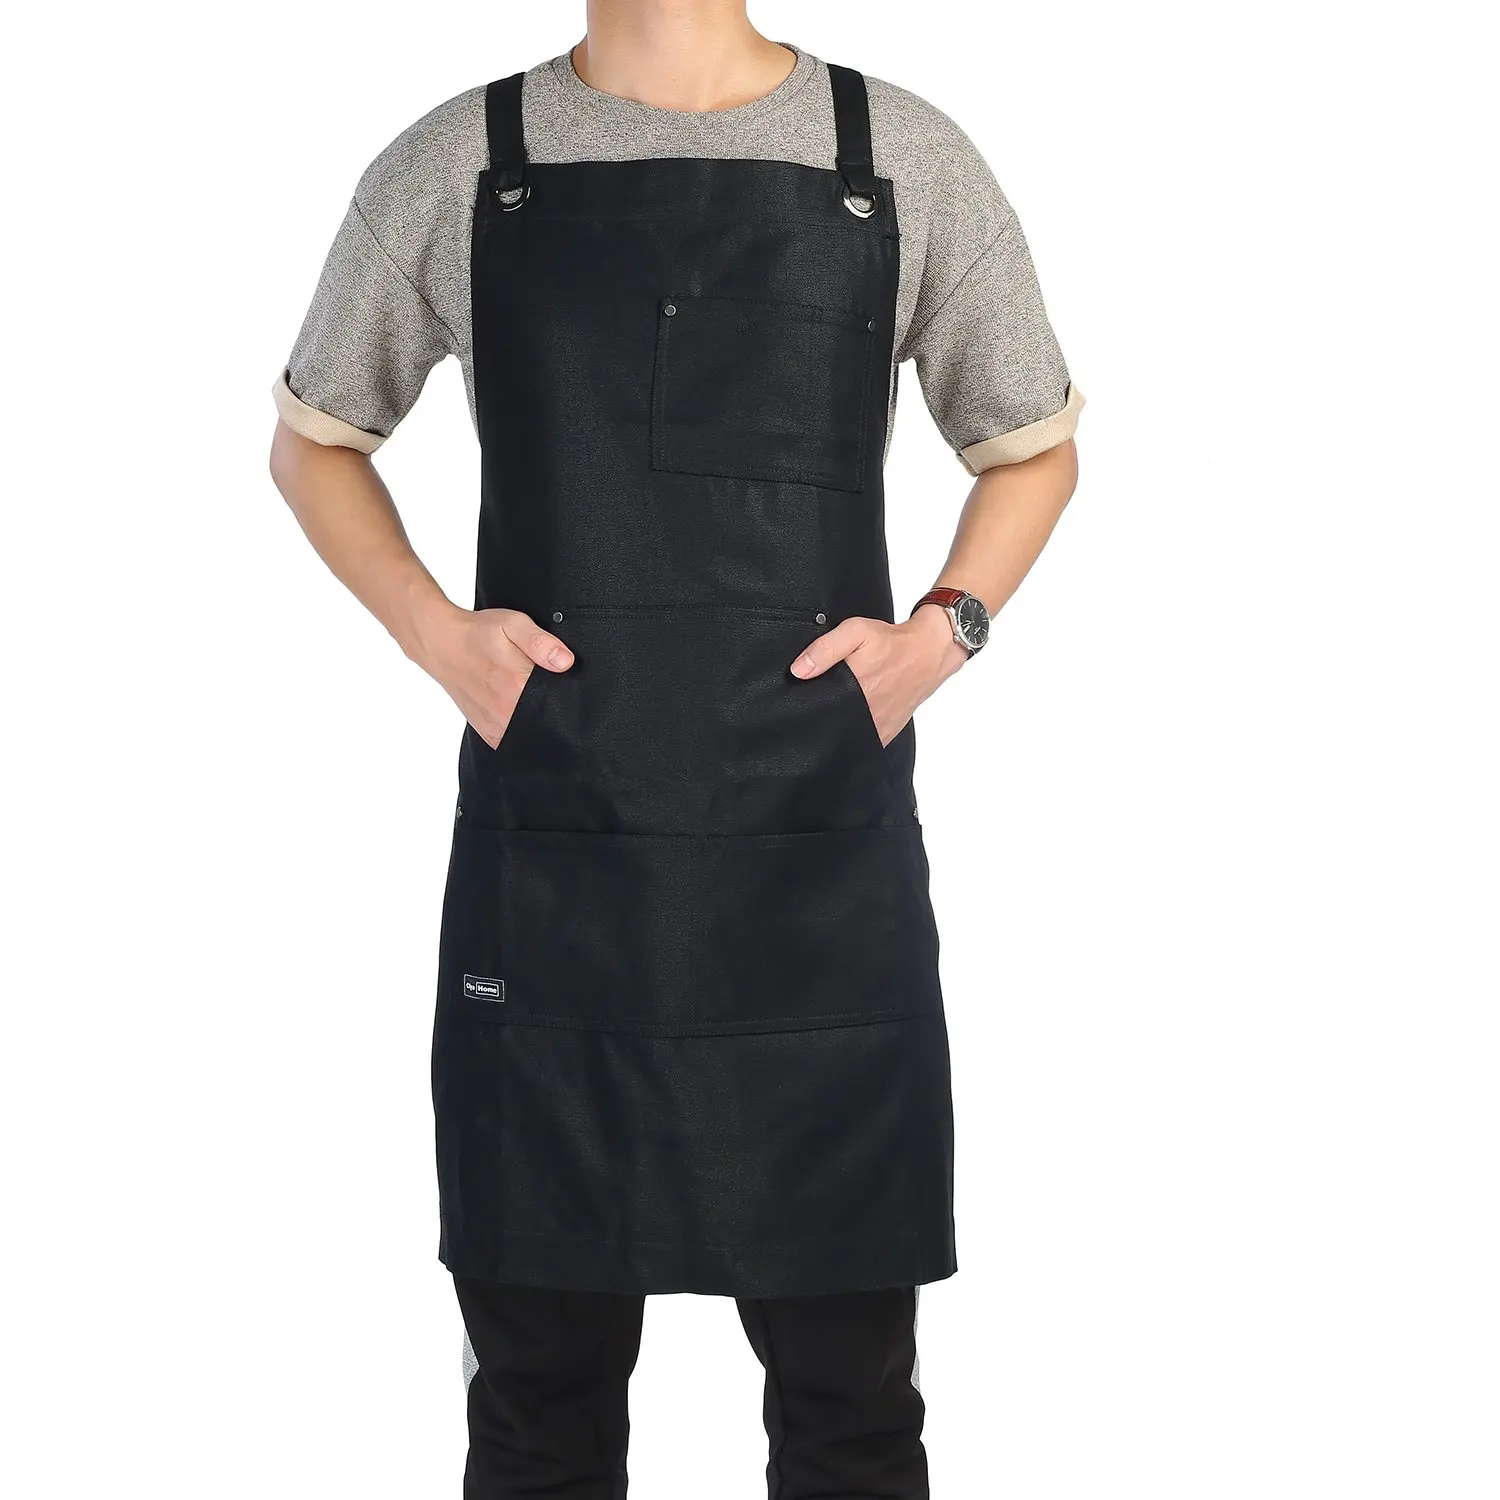 19.99. Work Apron, Clya Home Heavy Duty Waxed Canvas Apron Shop Apron with ...